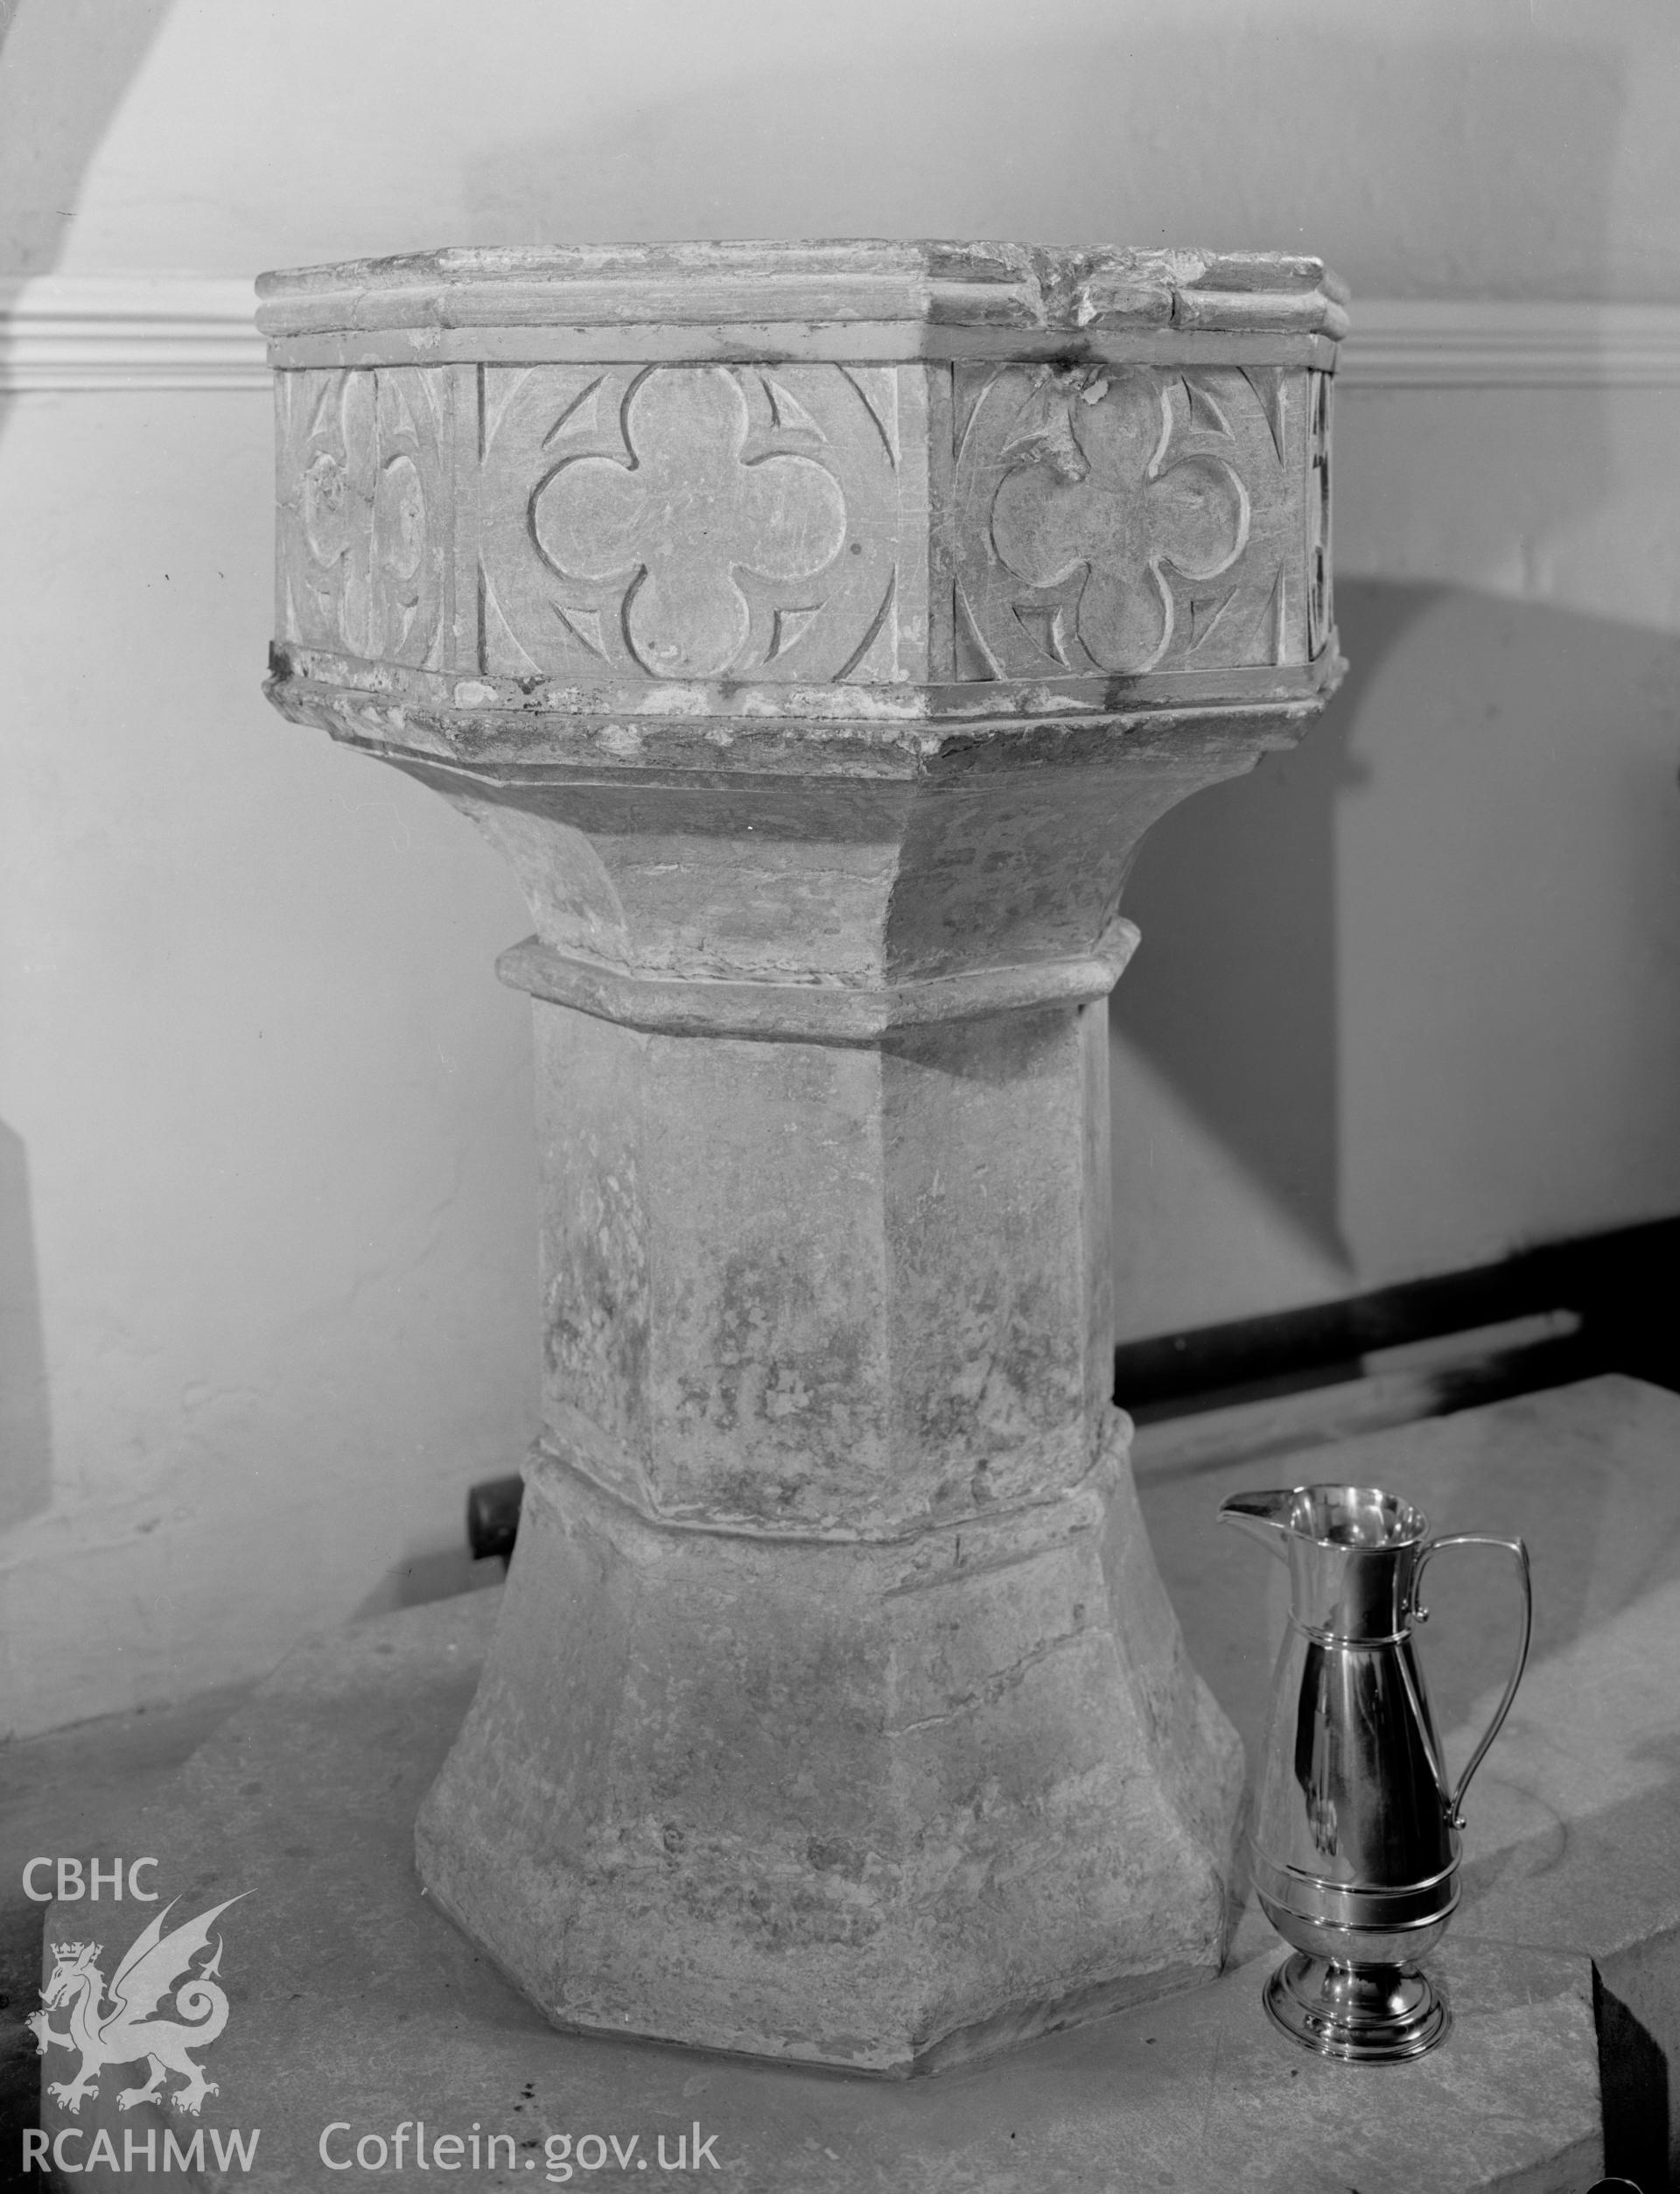 View of font and jug at St George's Church, St Georges taken 25.06.65.